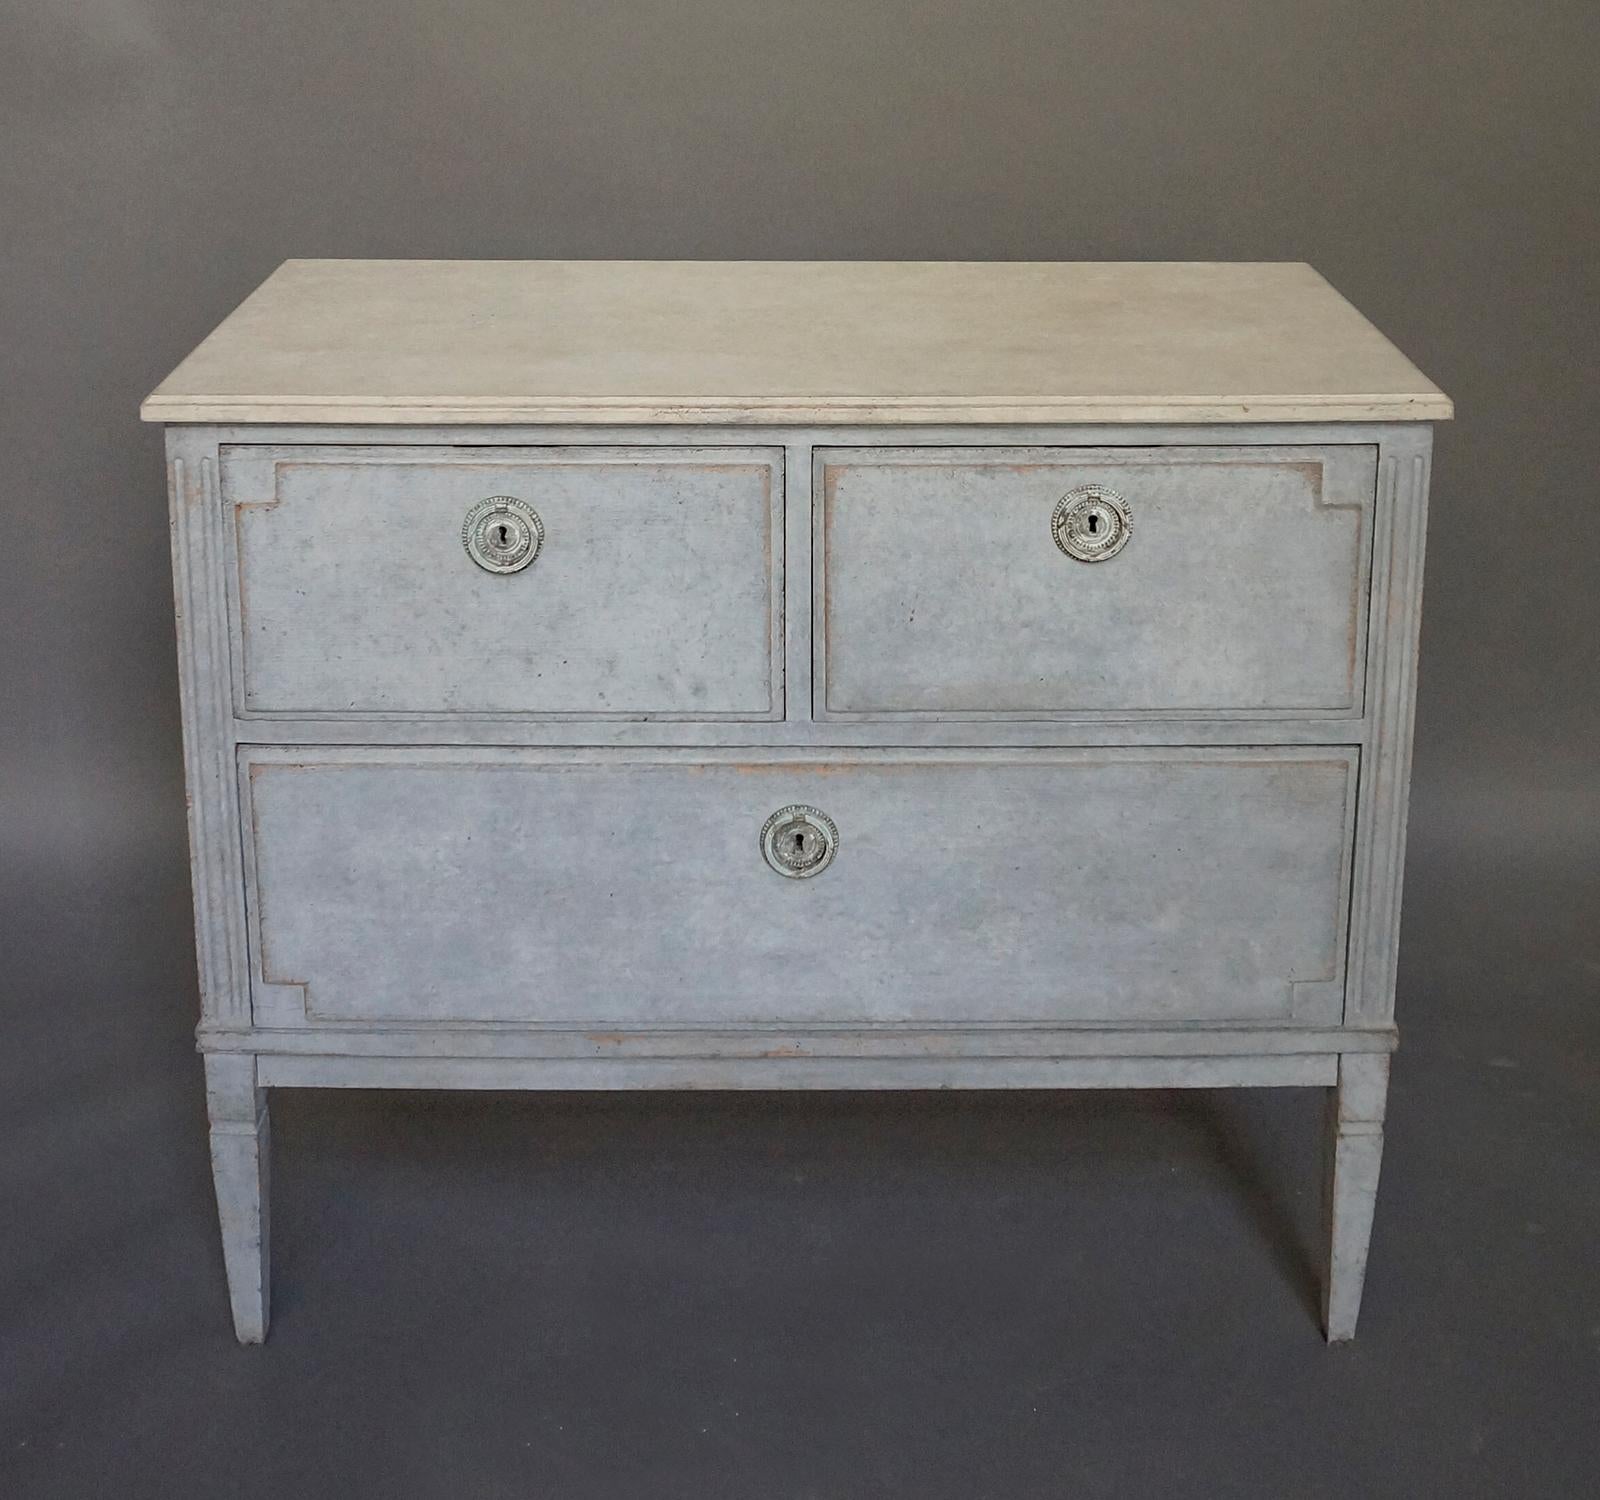 Two over one commode, Sweden, circa 1900, in the Gustavian style. Raised panels on the drawer fronts and fluted corner posts which extend into tapering square legs. A perfect size to use beside a bed or sofa.